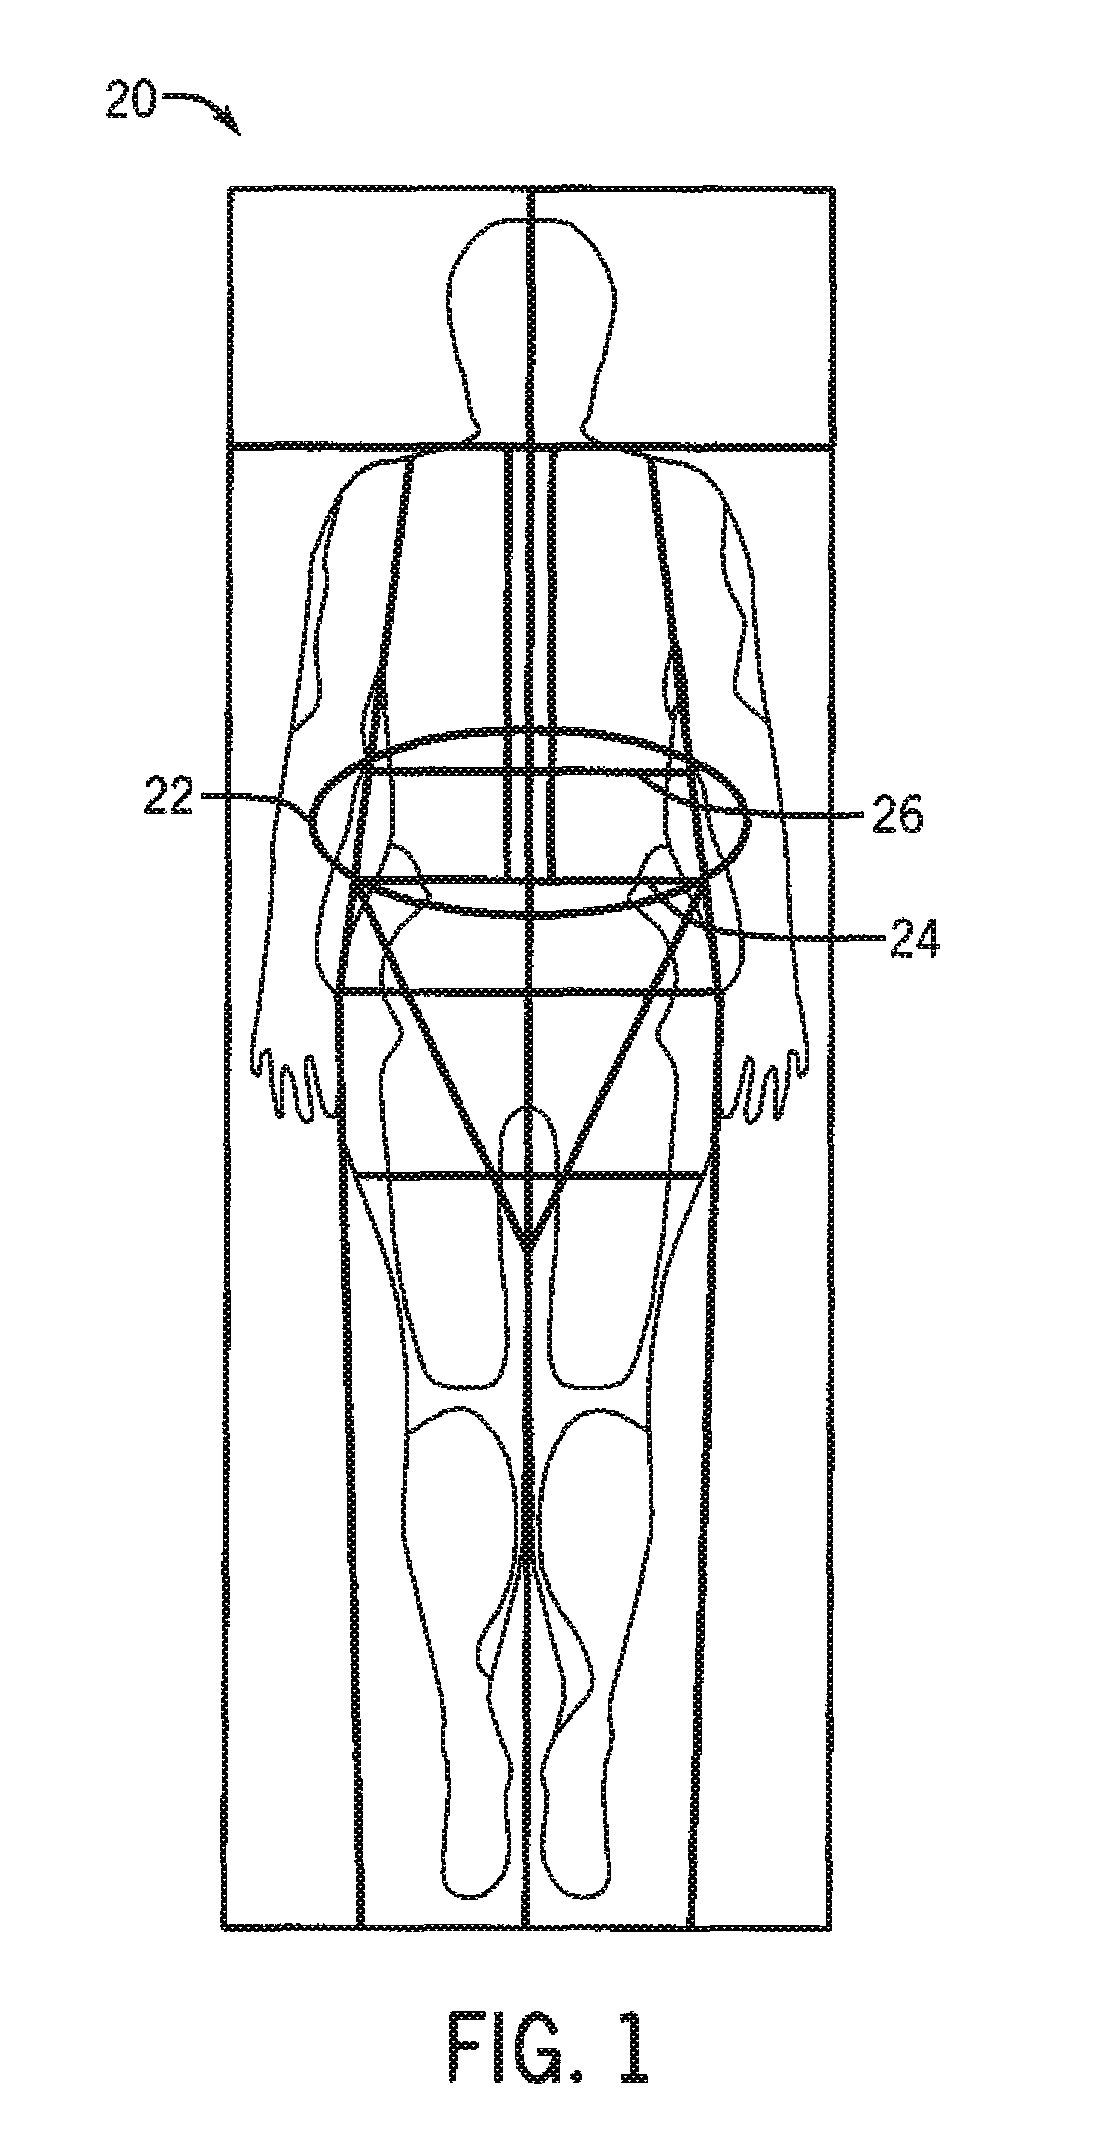 Method and system for measuring visceral fat mass using dual energy x-ray absorptiometry